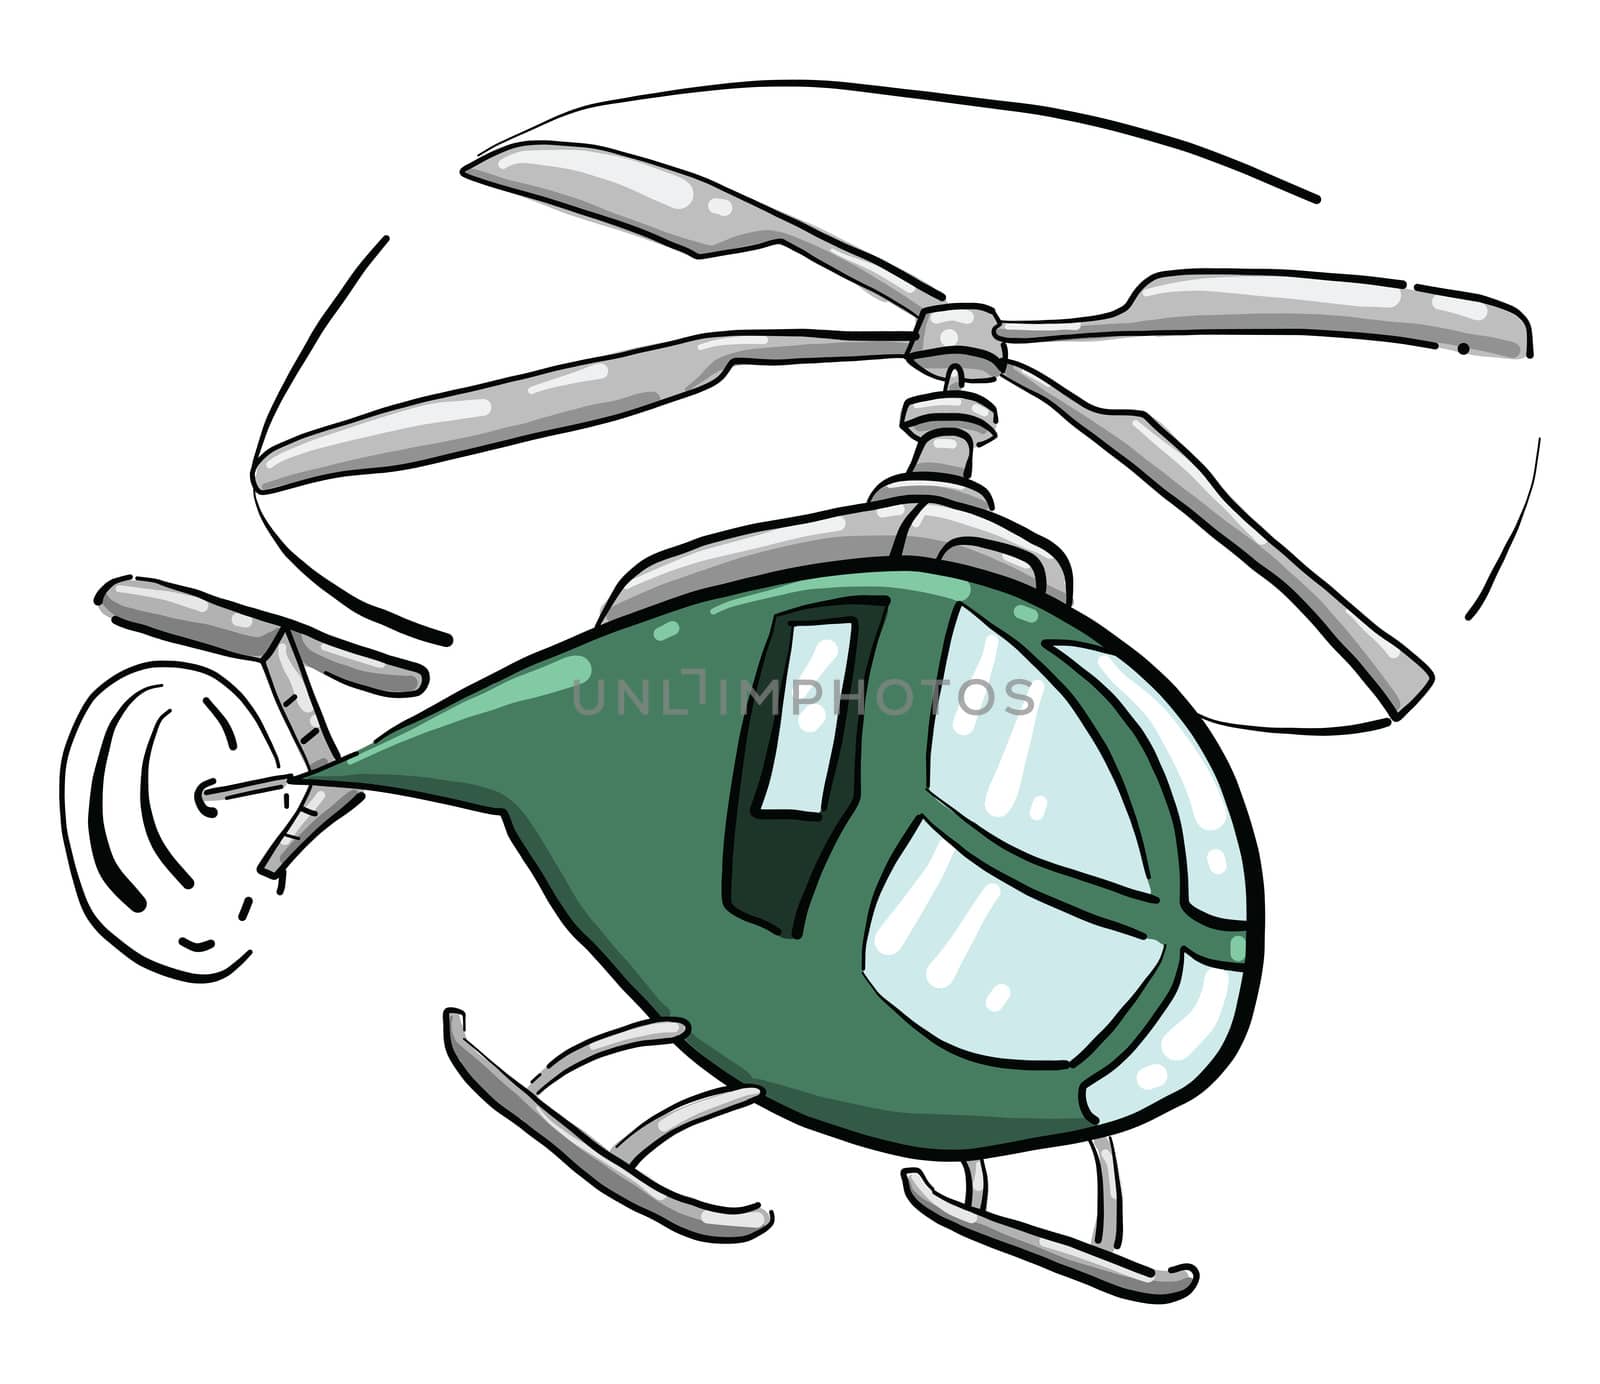 Green helicopter , illustration, vector on white background